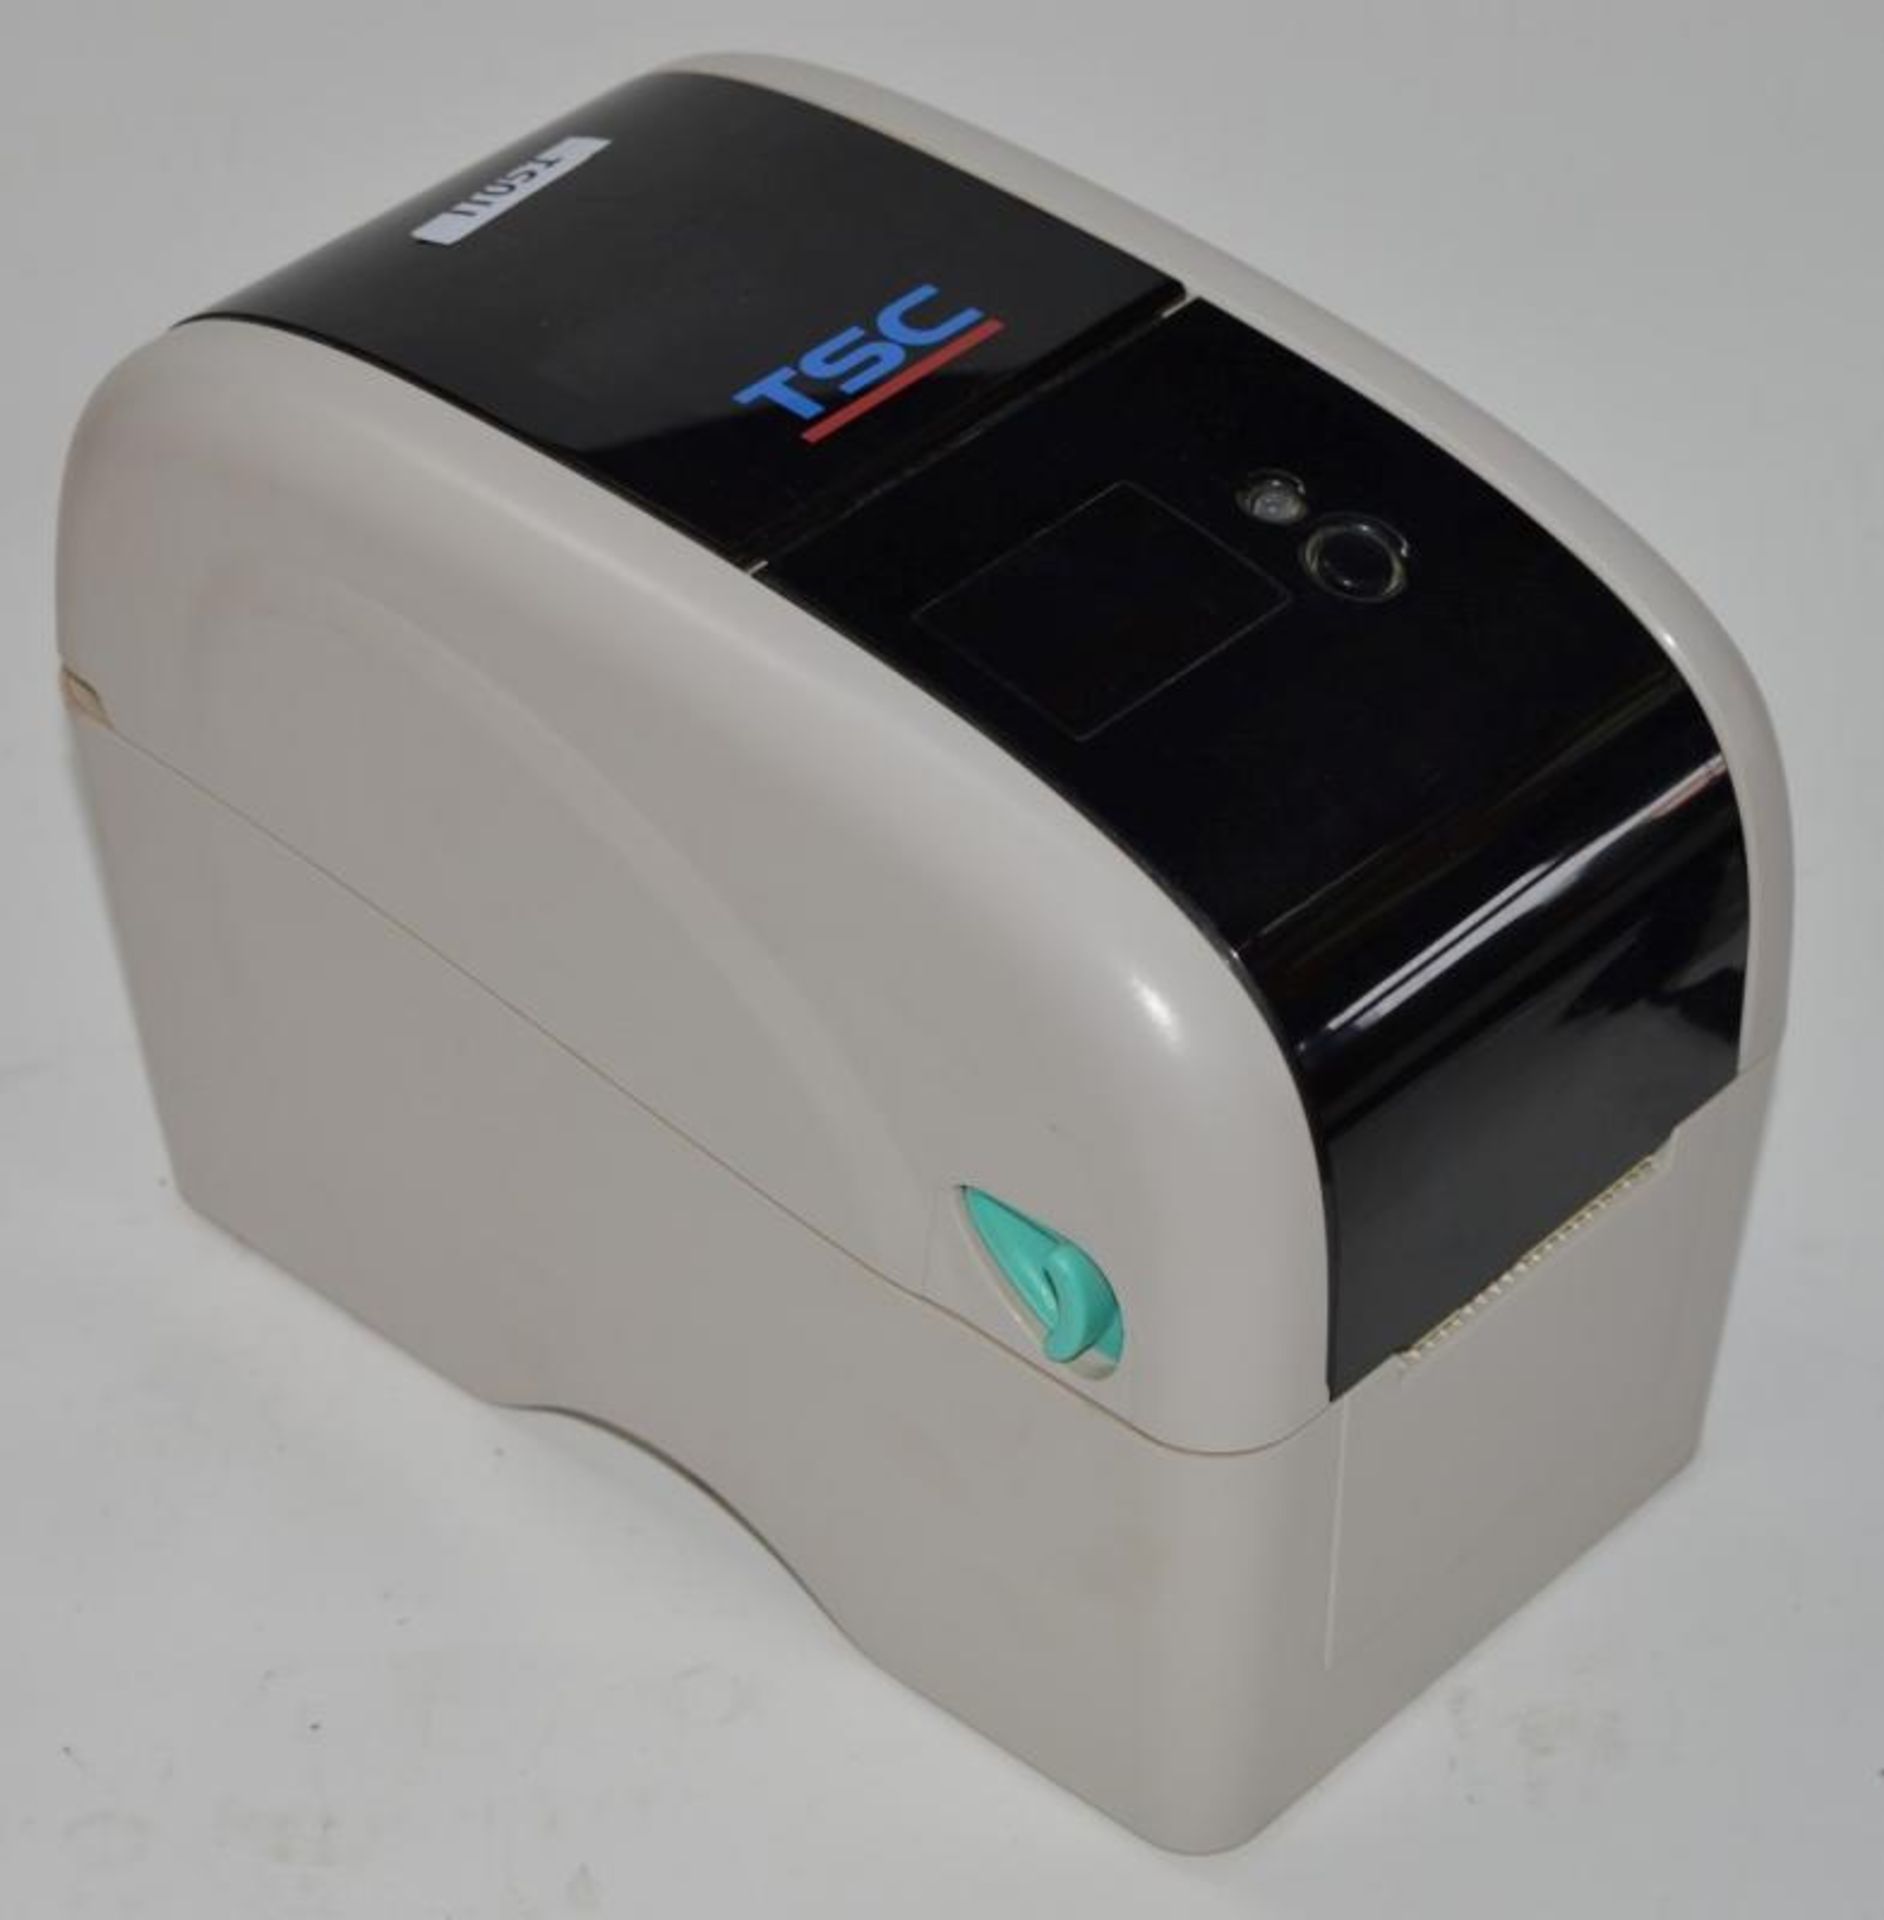 1 x TSC TTP-225 Label Barcode Printer With KP-200 Keyboard, Power Supply, 4 x Rolls of W5890 Wax and - Image 6 of 9